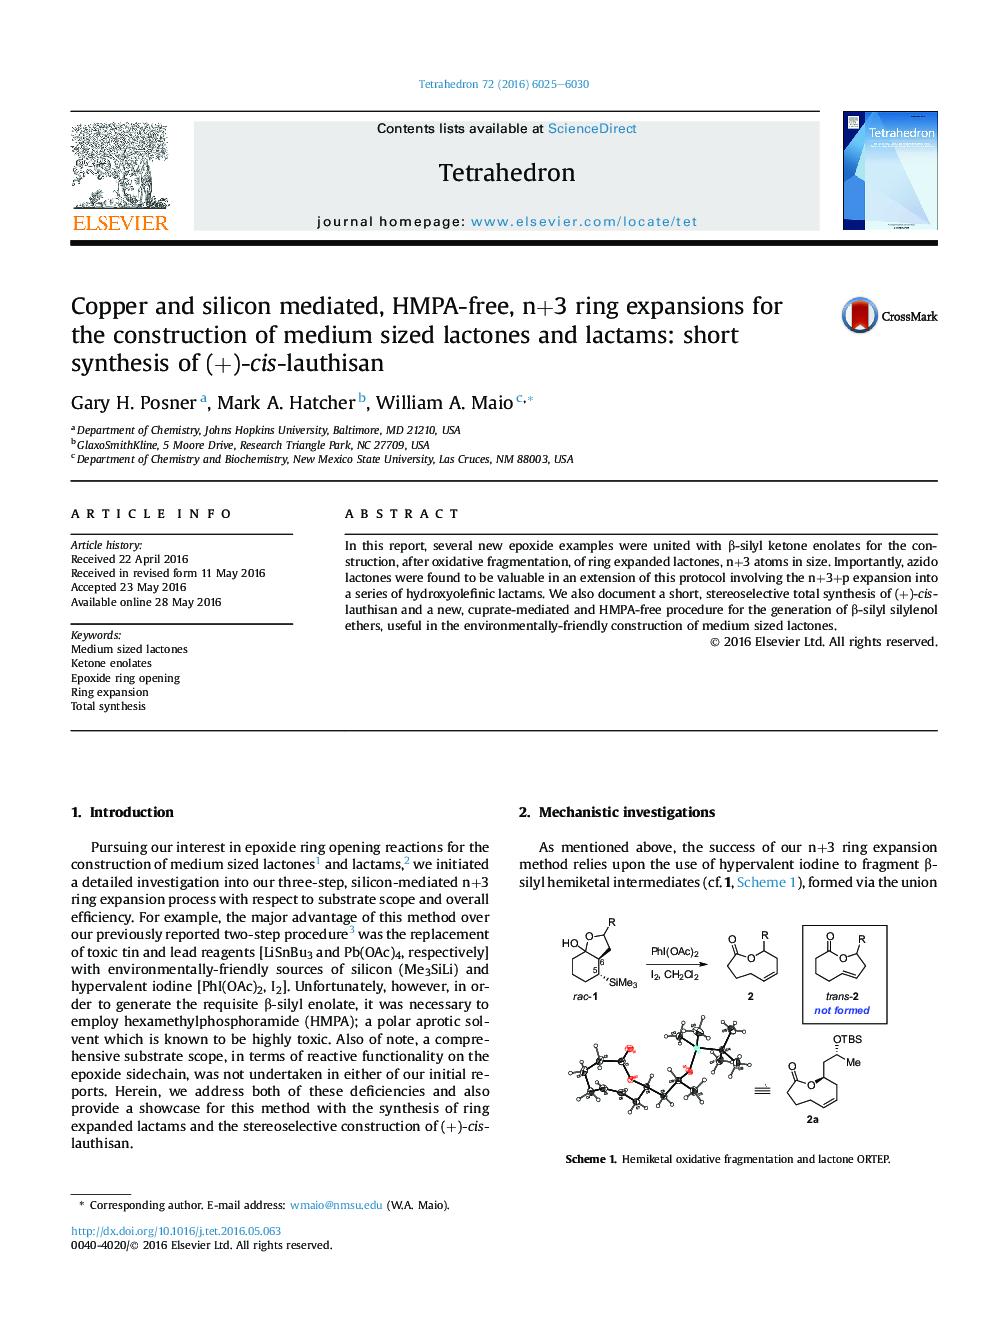 Copper and silicon mediated, HMPA-free, n+3 ring expansions for the construction of medium sized lactones and lactams: short synthesis of (+)-cis-lauthisan